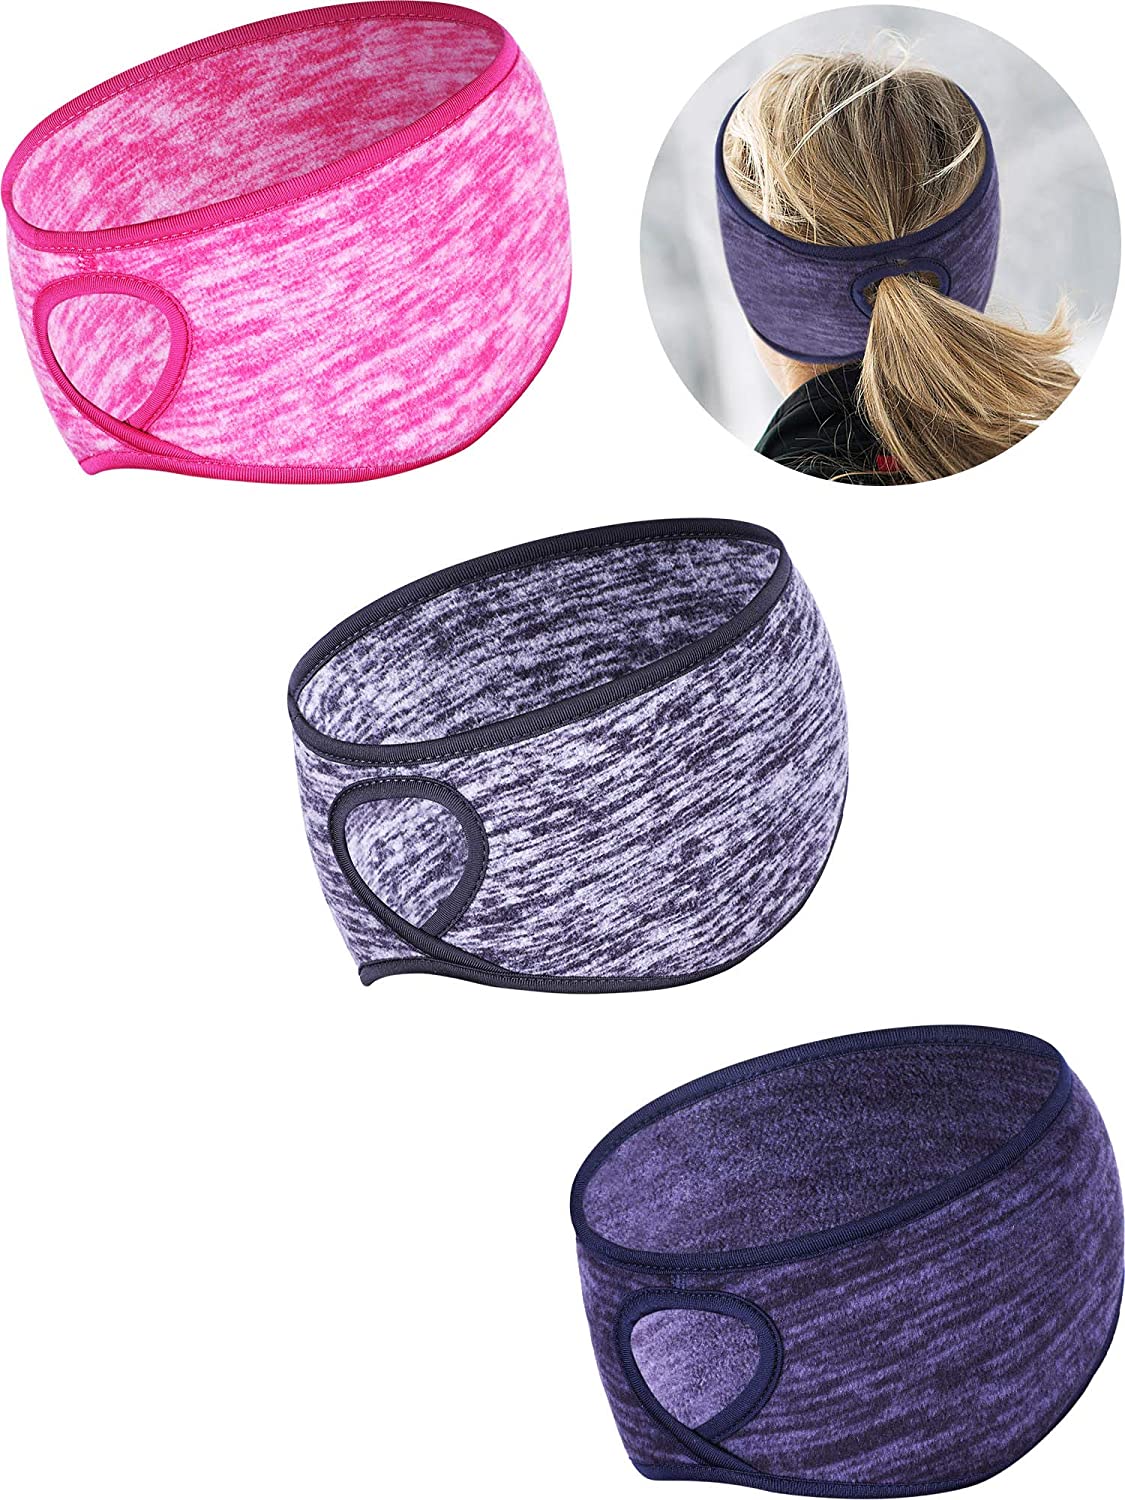 Tatuo Fleece Ponytail Headband, 3 Pieces | Cold Weather Exercise Gear